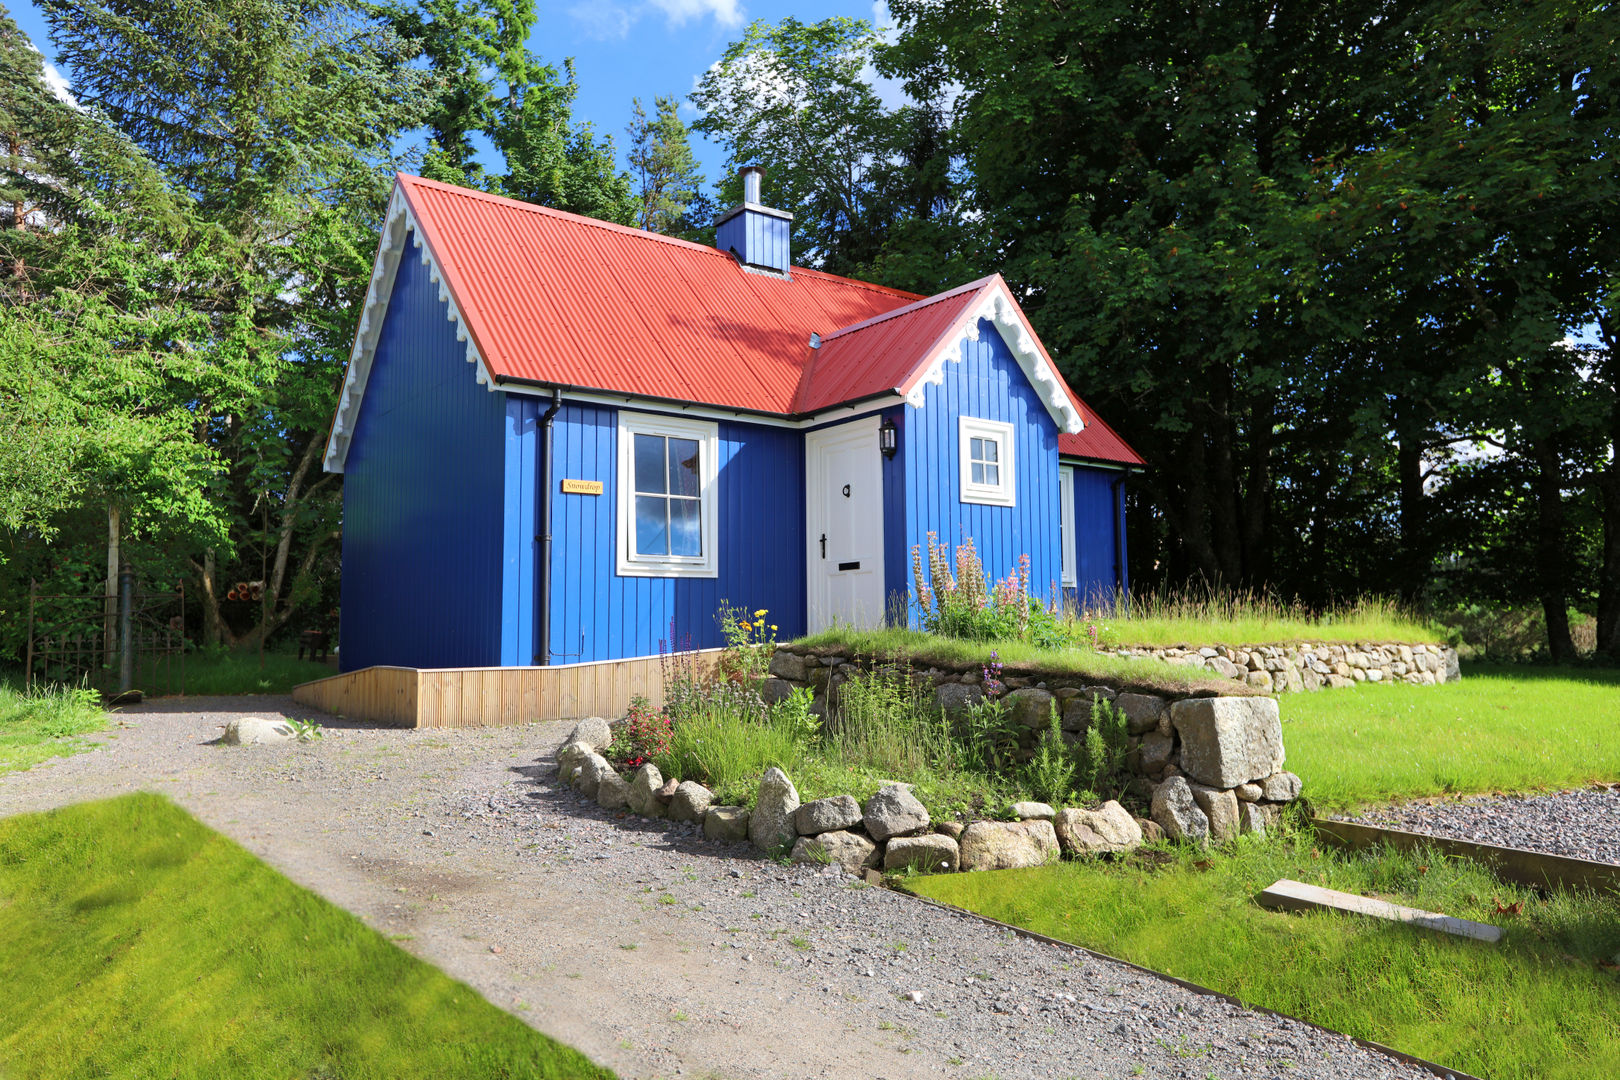 One Bedroom Bespoke Wee House, The Wee House Company The Wee House Company Country style house